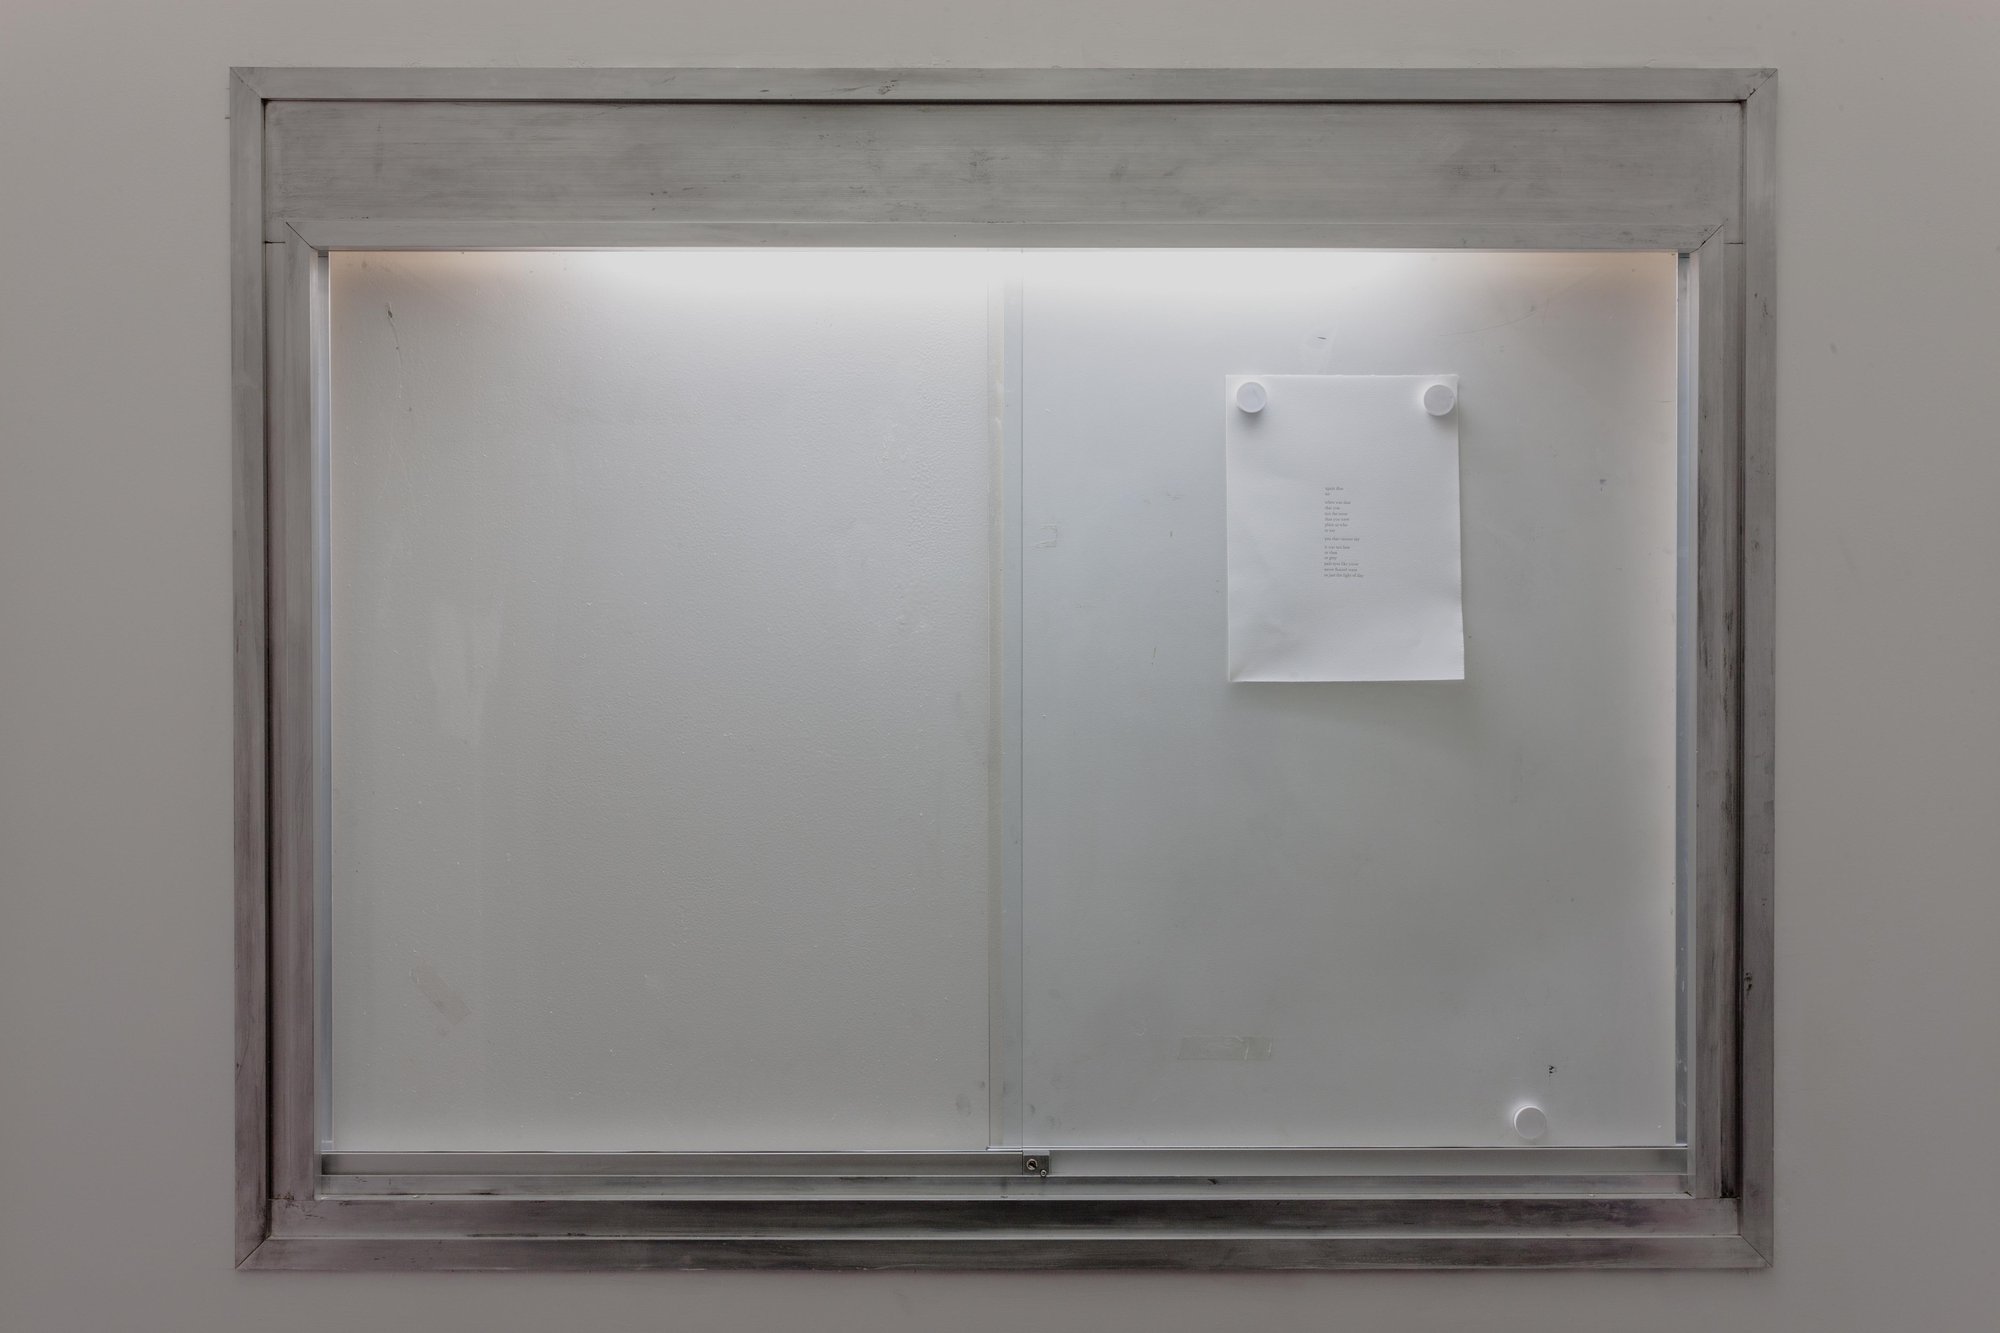 Duncan Campbell, Untitled, found metal vitrine and poem, 123.3 x 158.4 cm, 2015